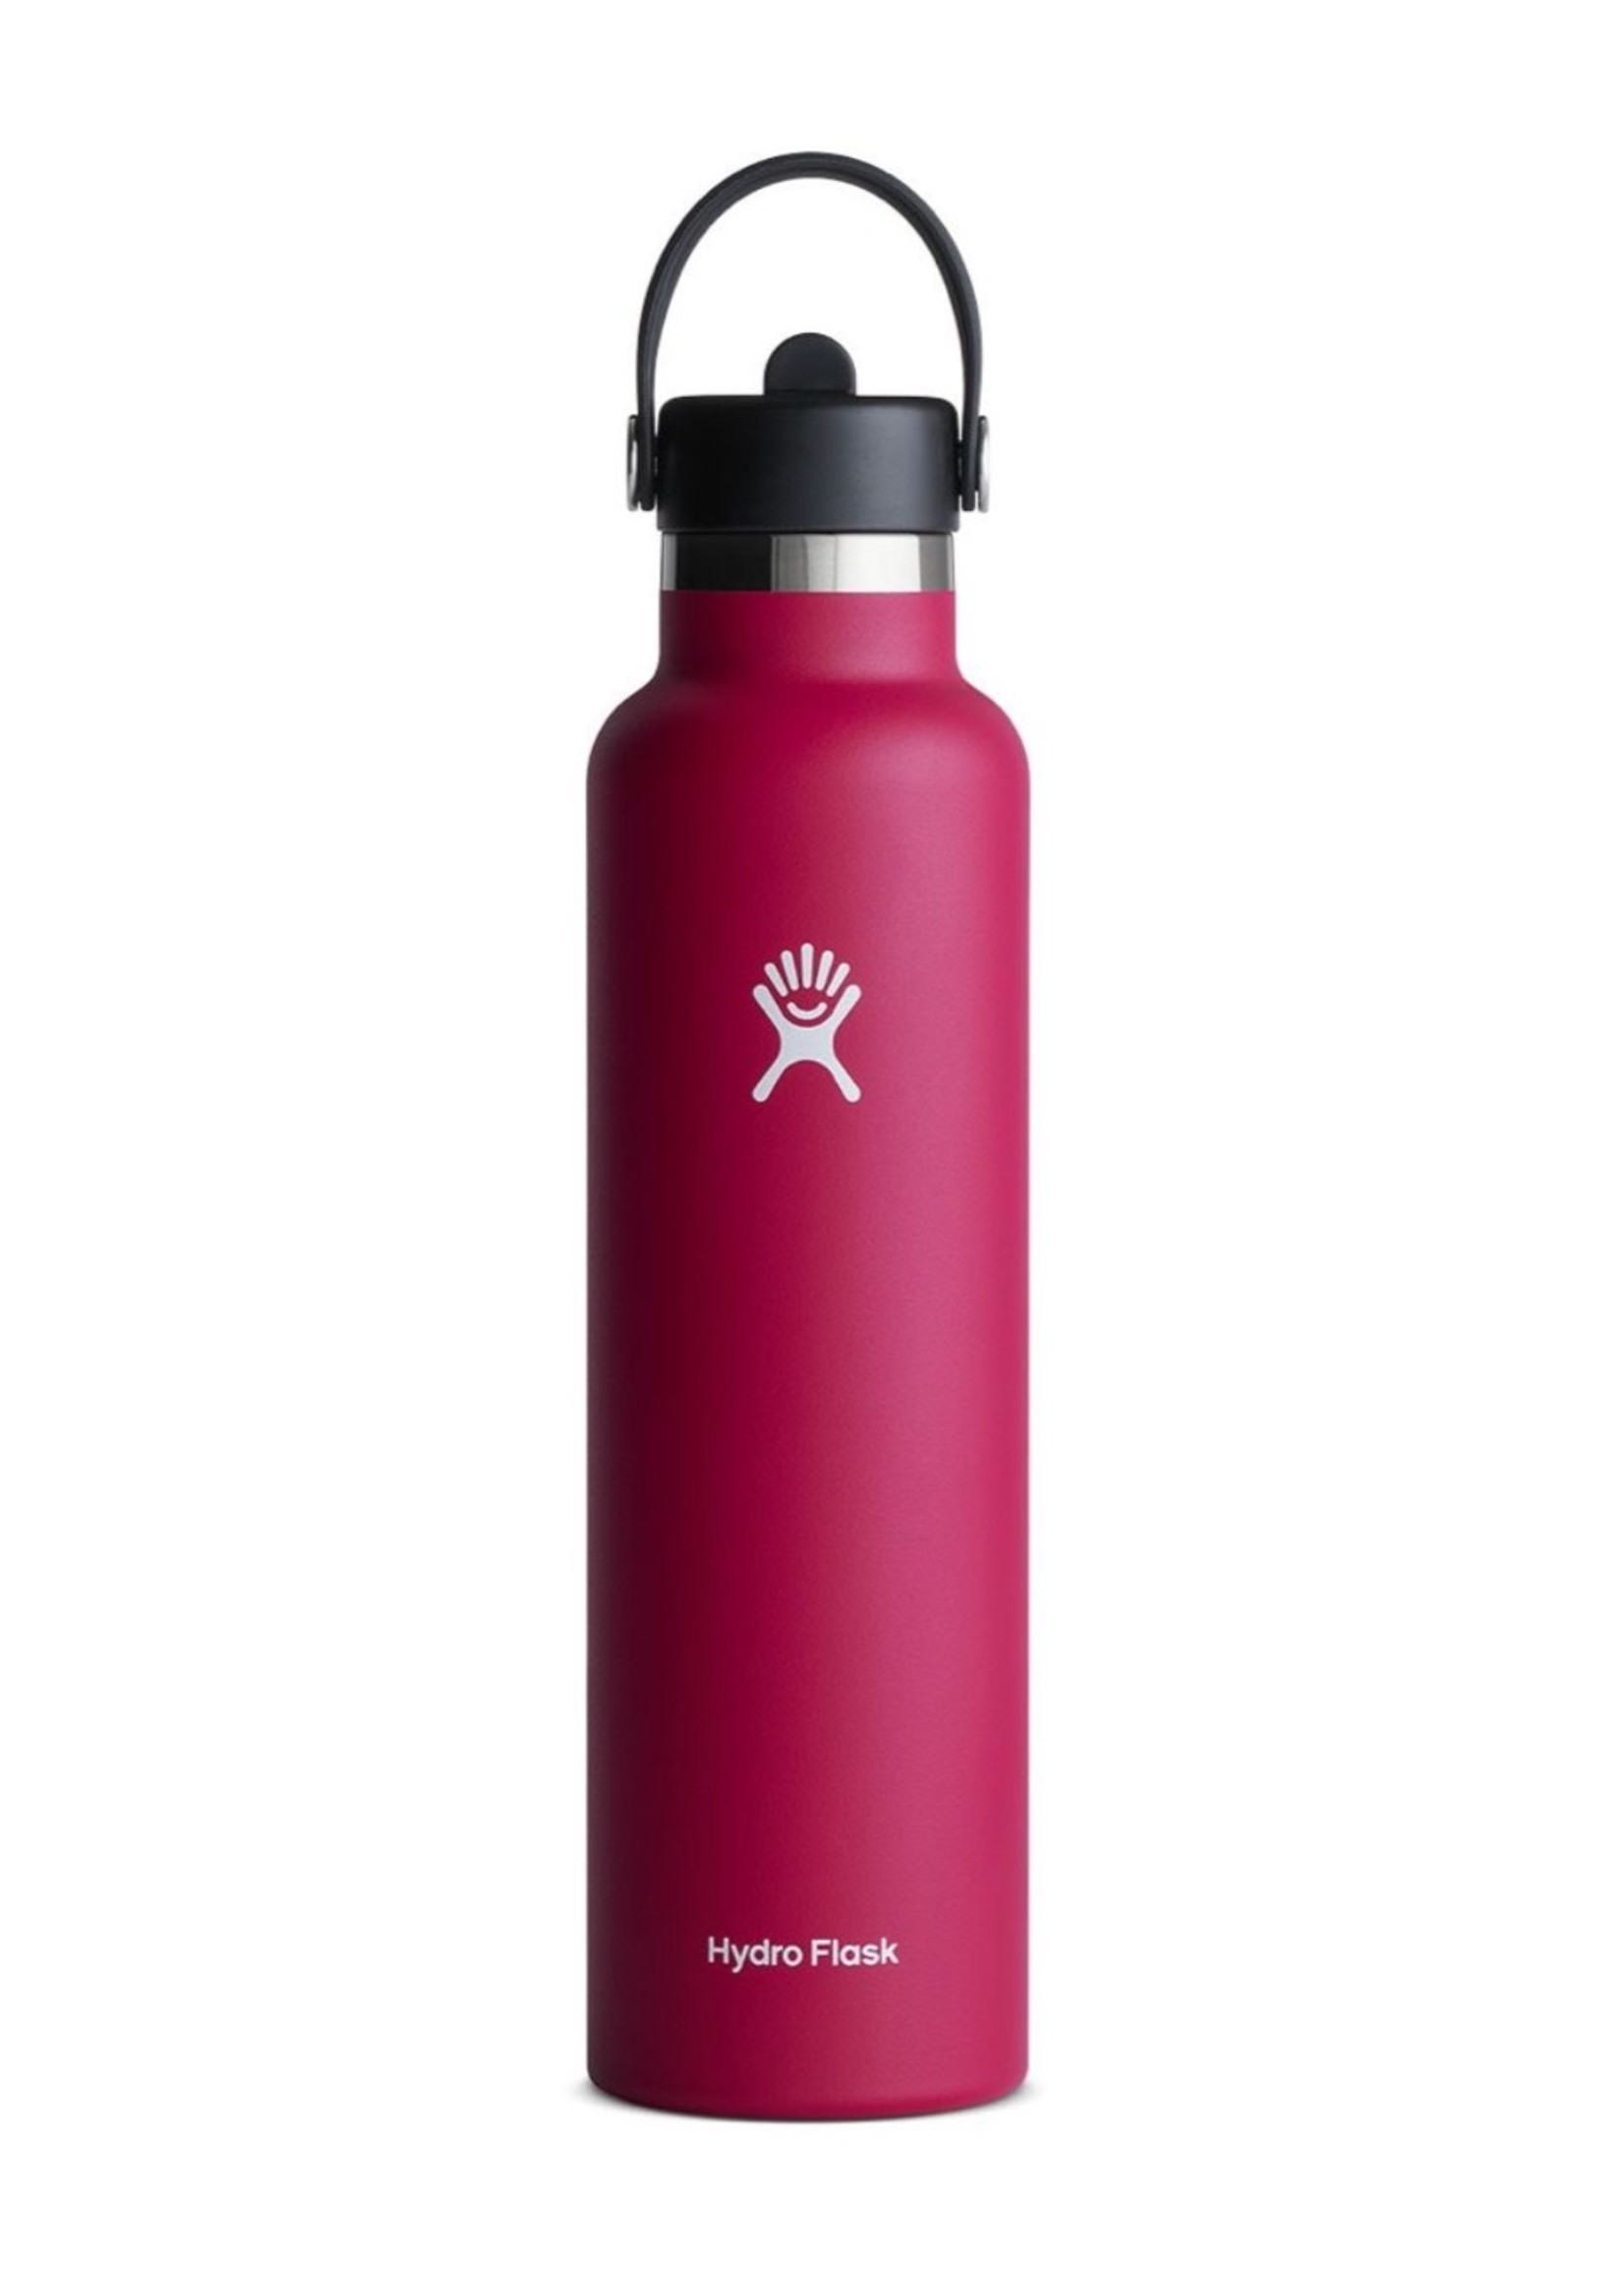 Hydro Flask Hydro Flask, 21oz Standard Mouth with Flex Straw Cap in Snapper